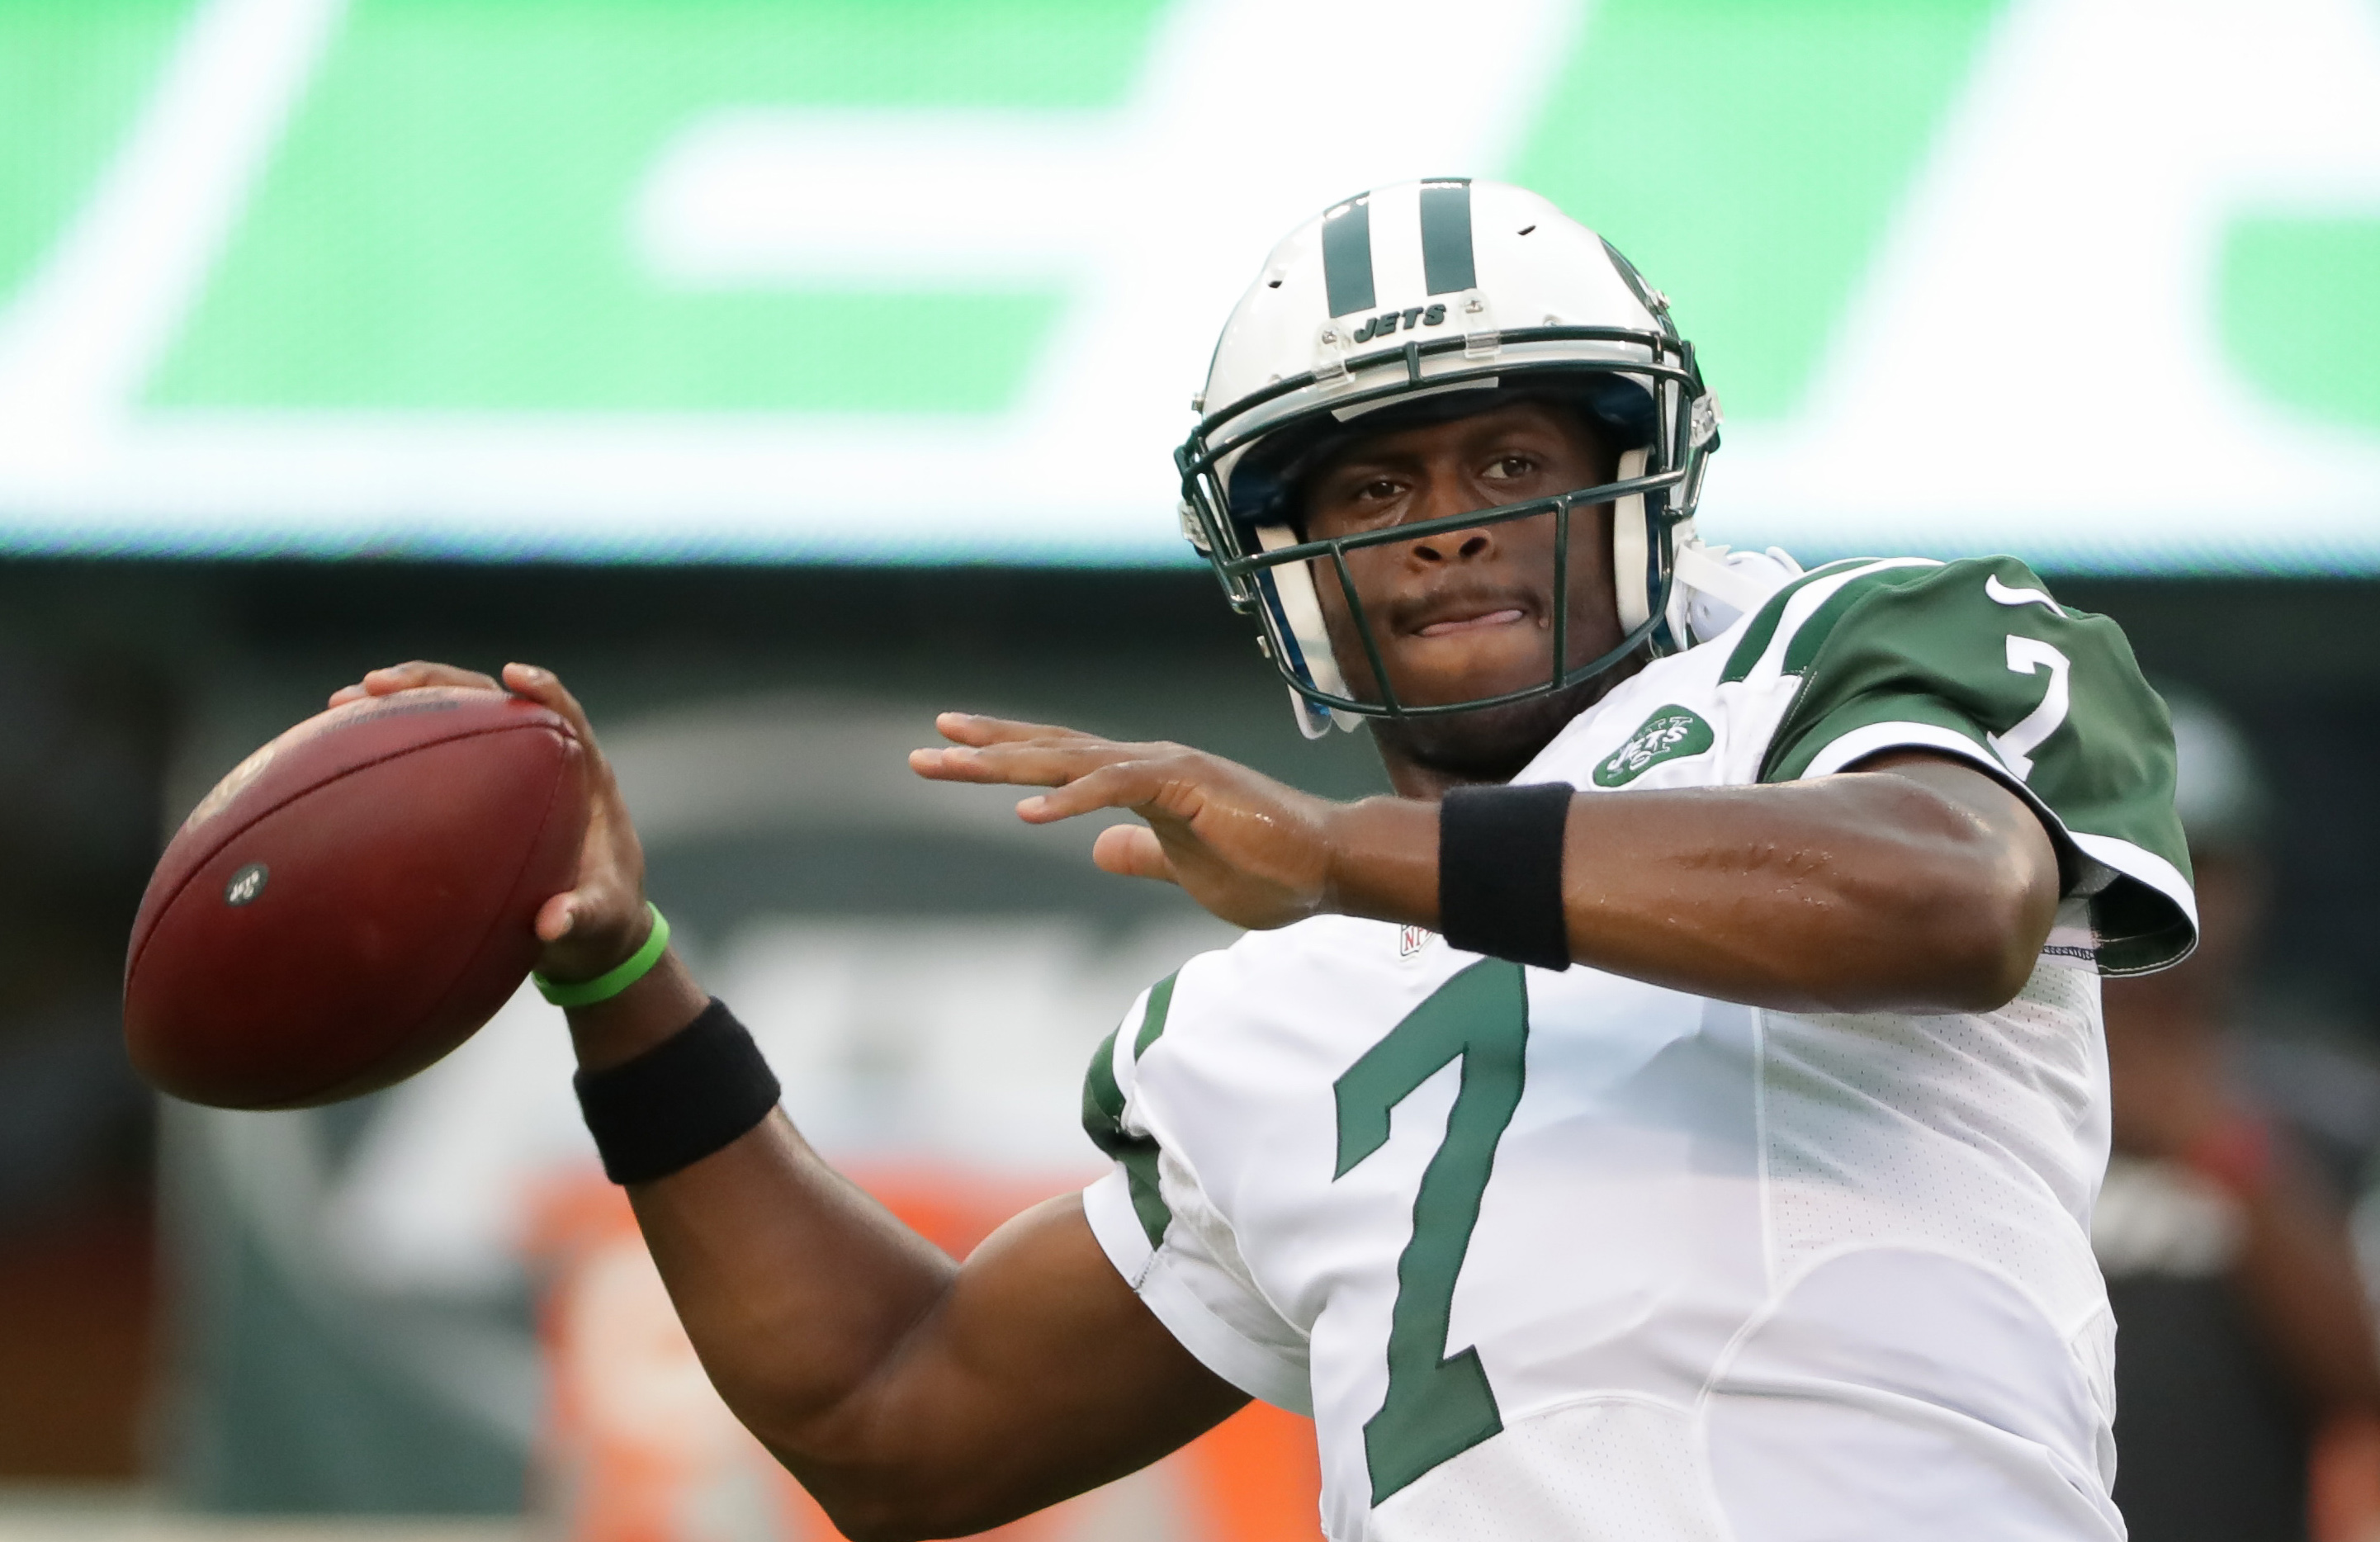 If The New York Jets Thought Anything Of Geno Smith, Fitz Wouldn't Have Been Re-Signed 2